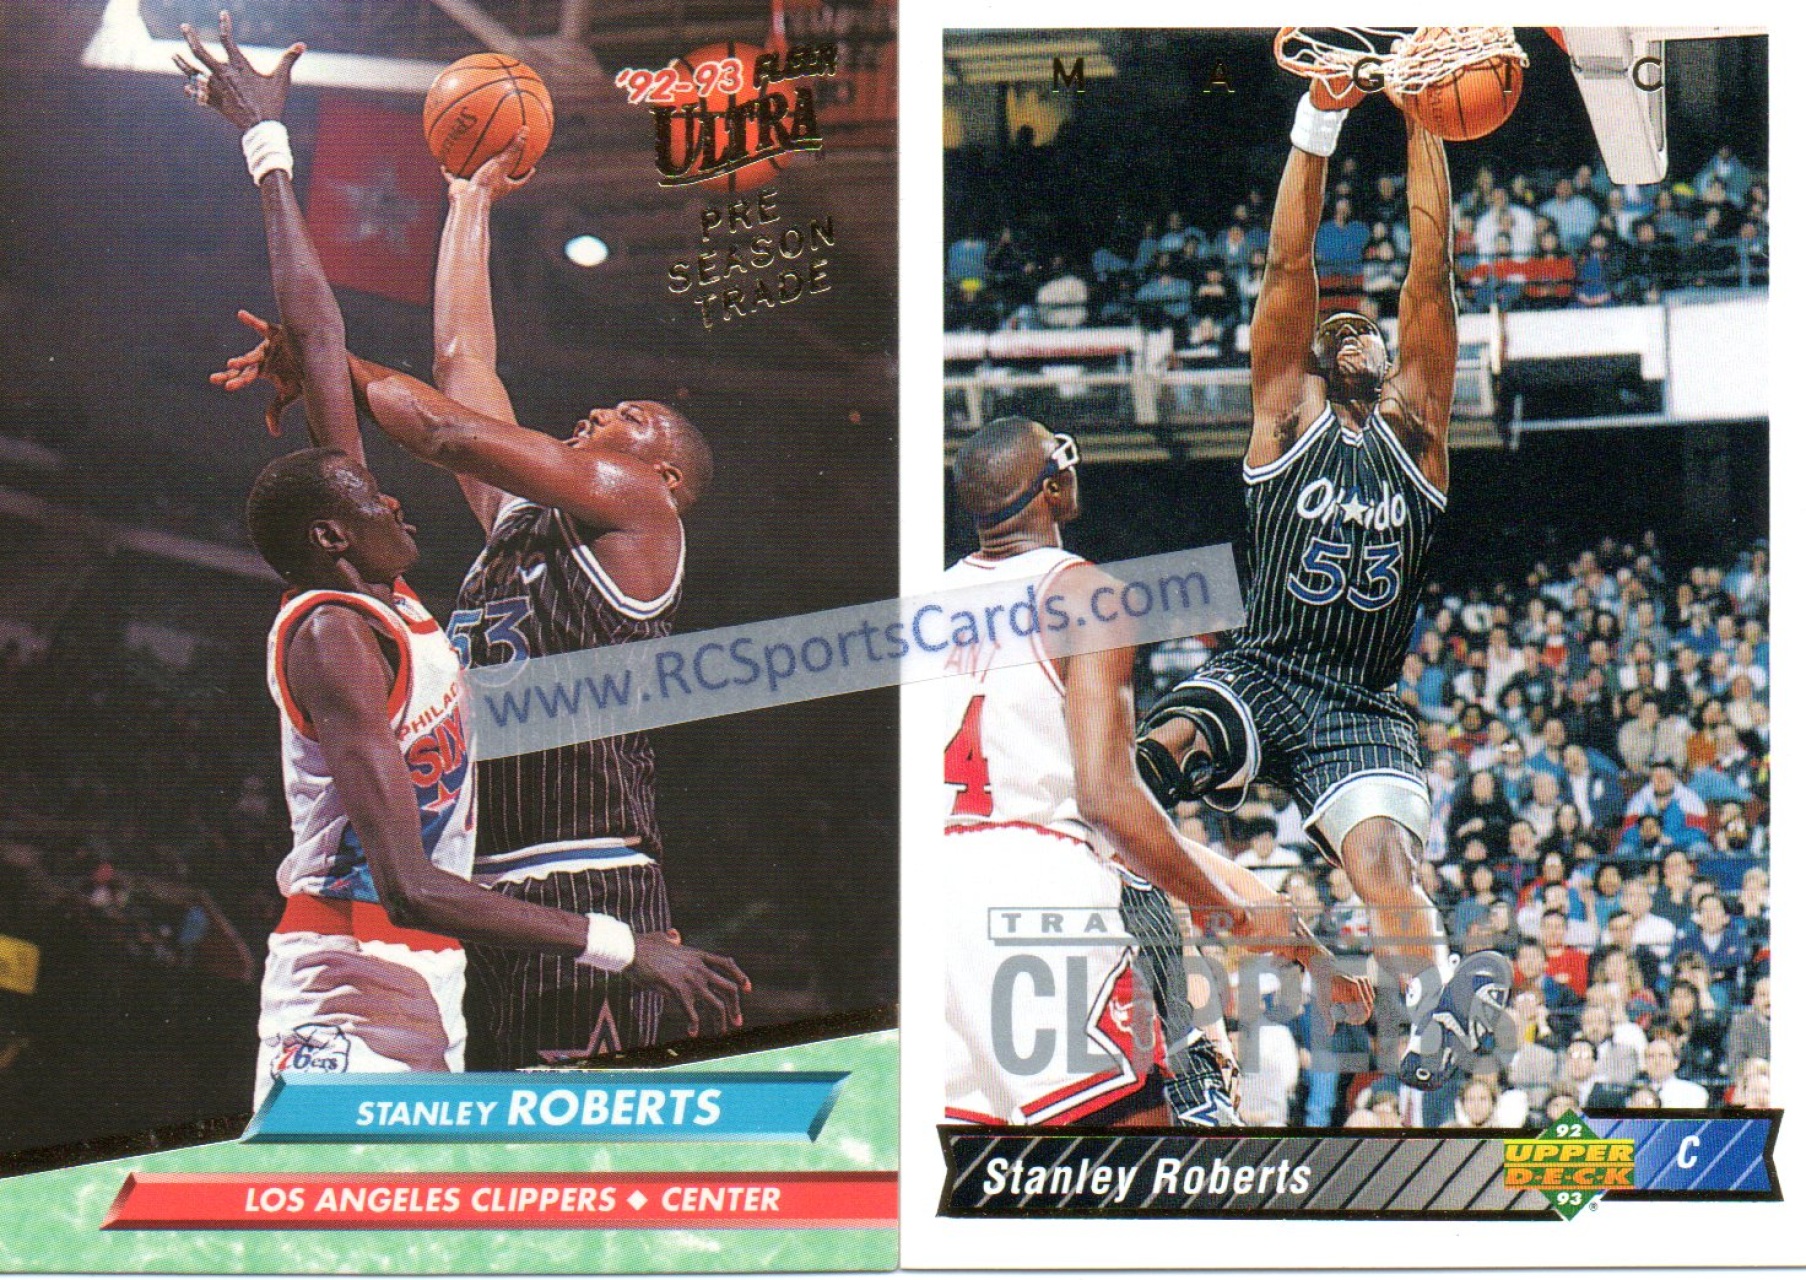  1994-95 Upper Deck Basketball #339 Nick Anderson Orlando Magic  Official NBA Trading Card From UD : Collectibles & Fine Art